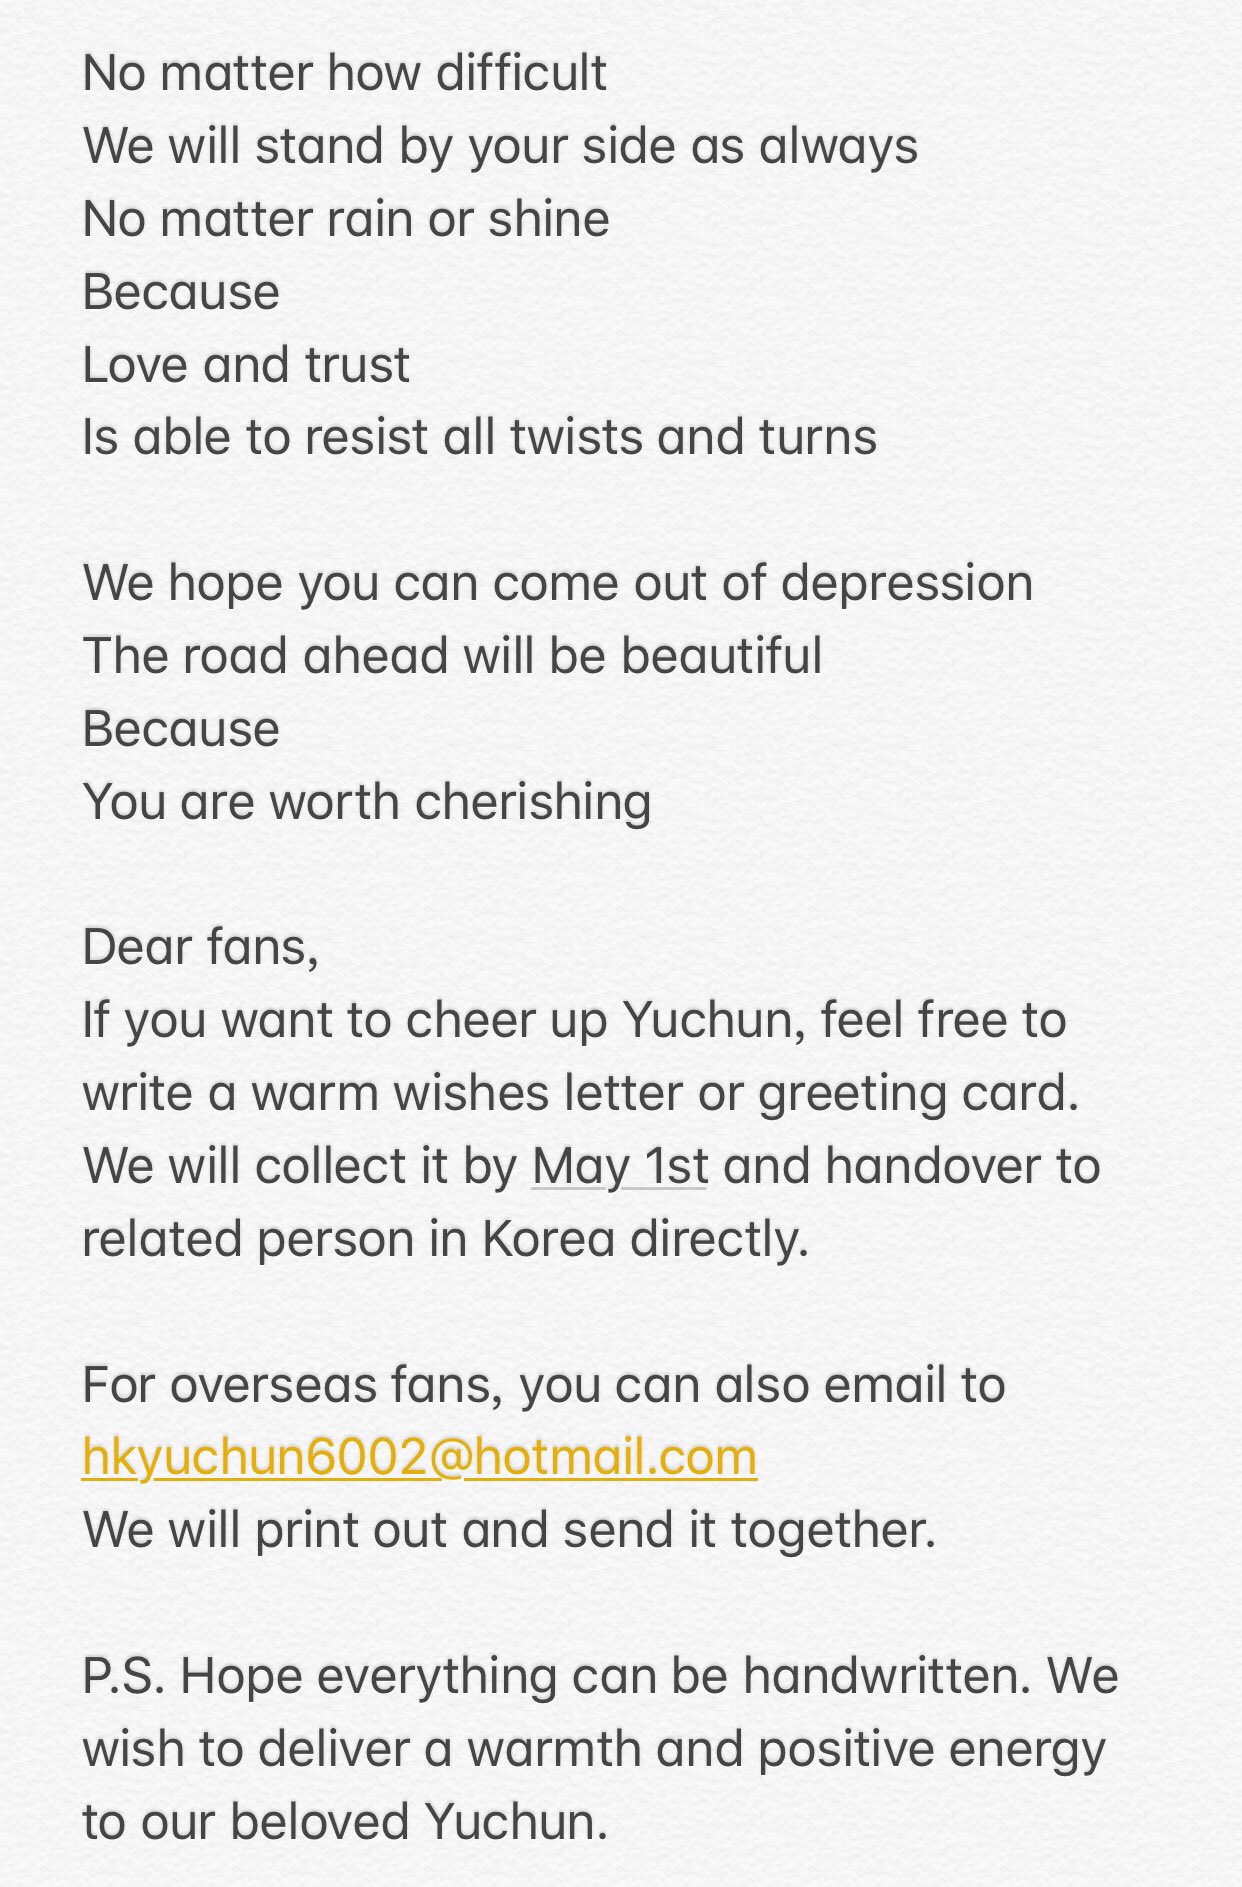 HK 옥탑방 Family on Twitter: "Dear fans, If you want to cheer up